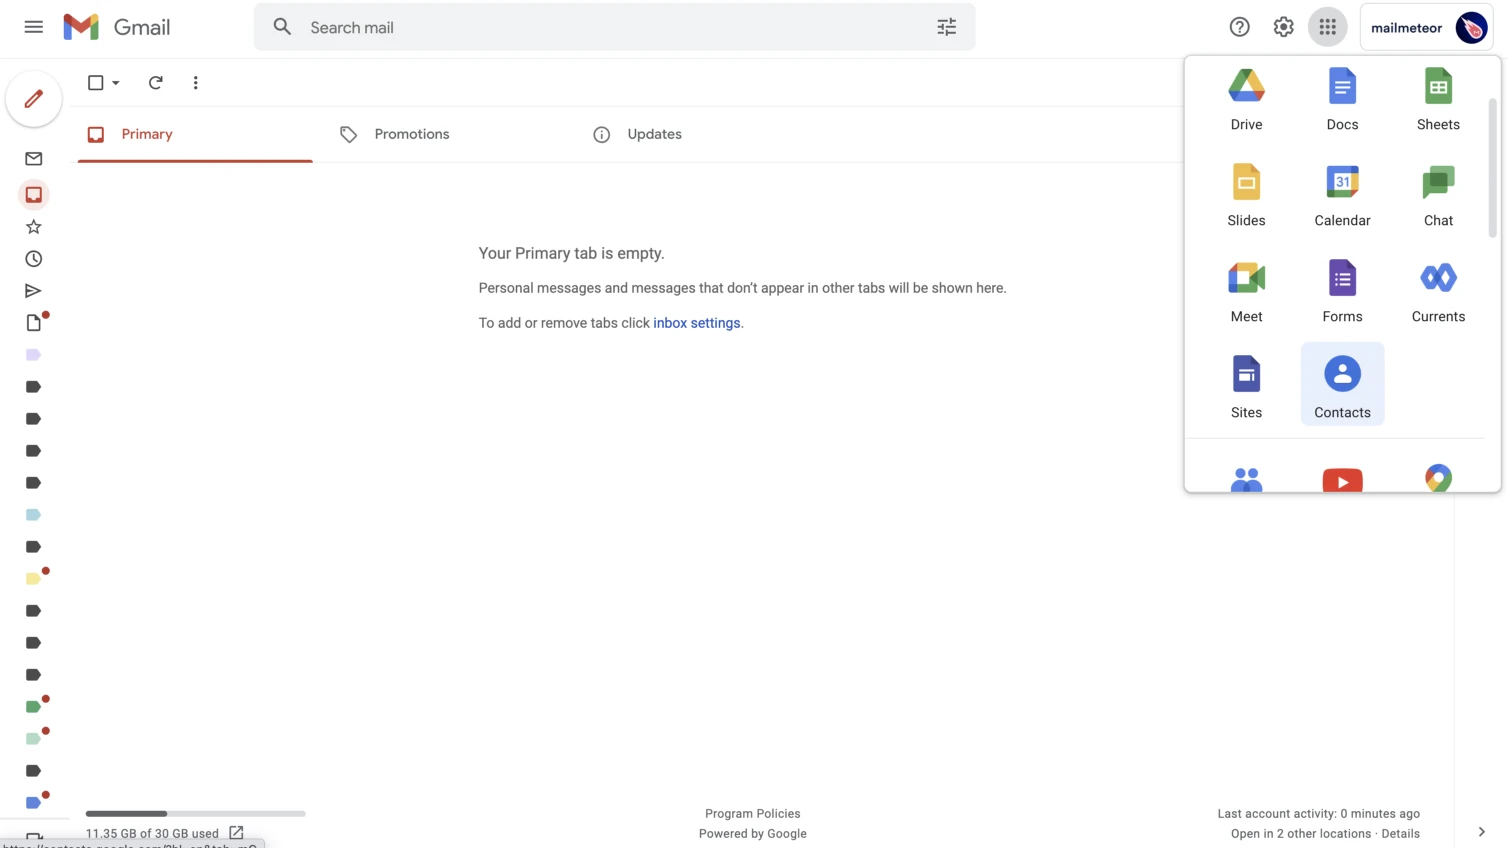 Gmail messages formed as chat